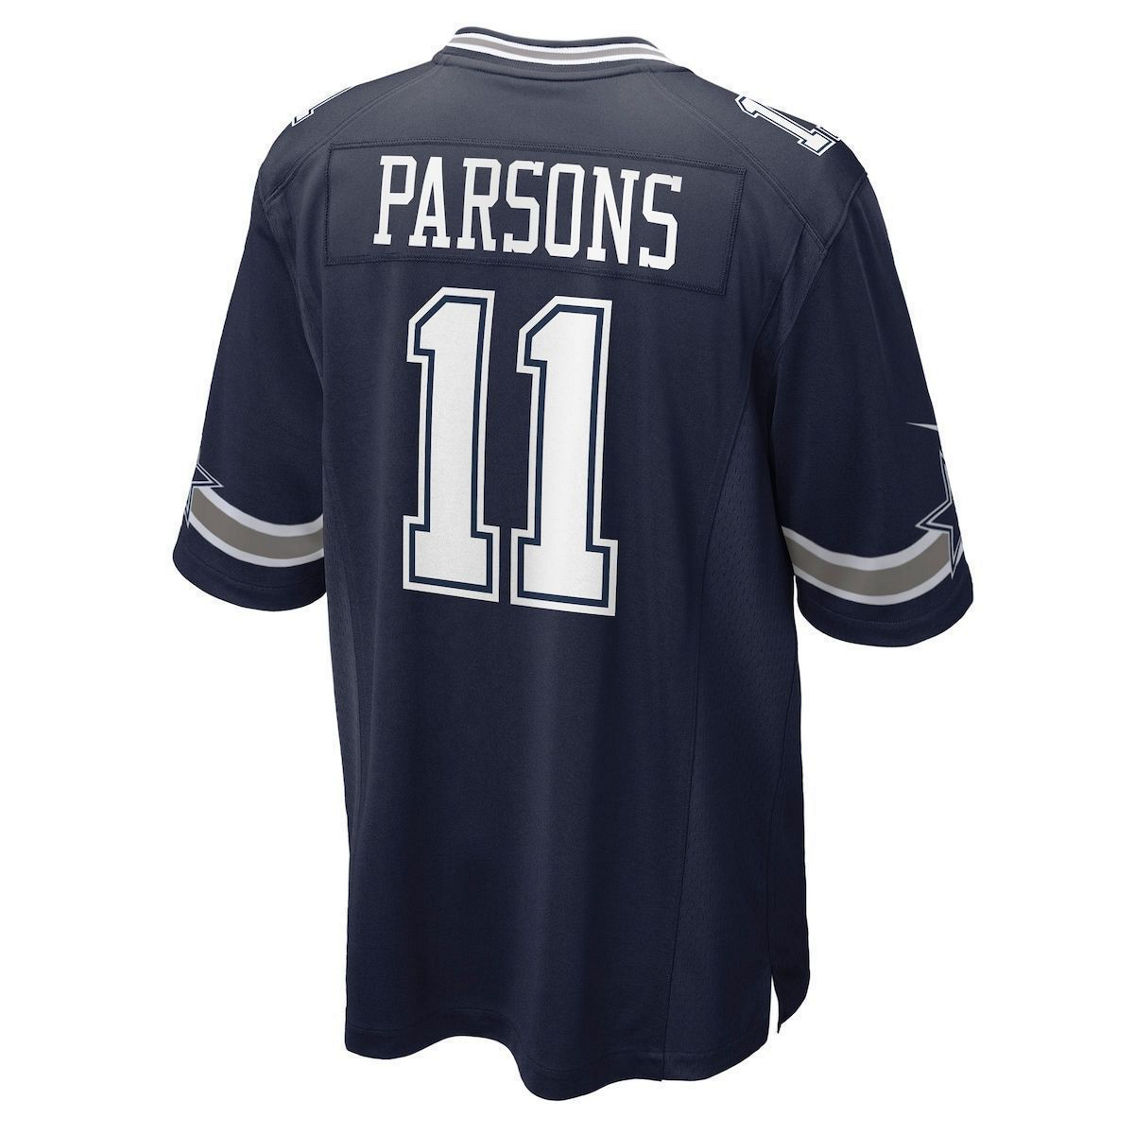 Nike Youth Micah Parsons Navy Dallas Cowboys Game Jersey - Image 4 of 4